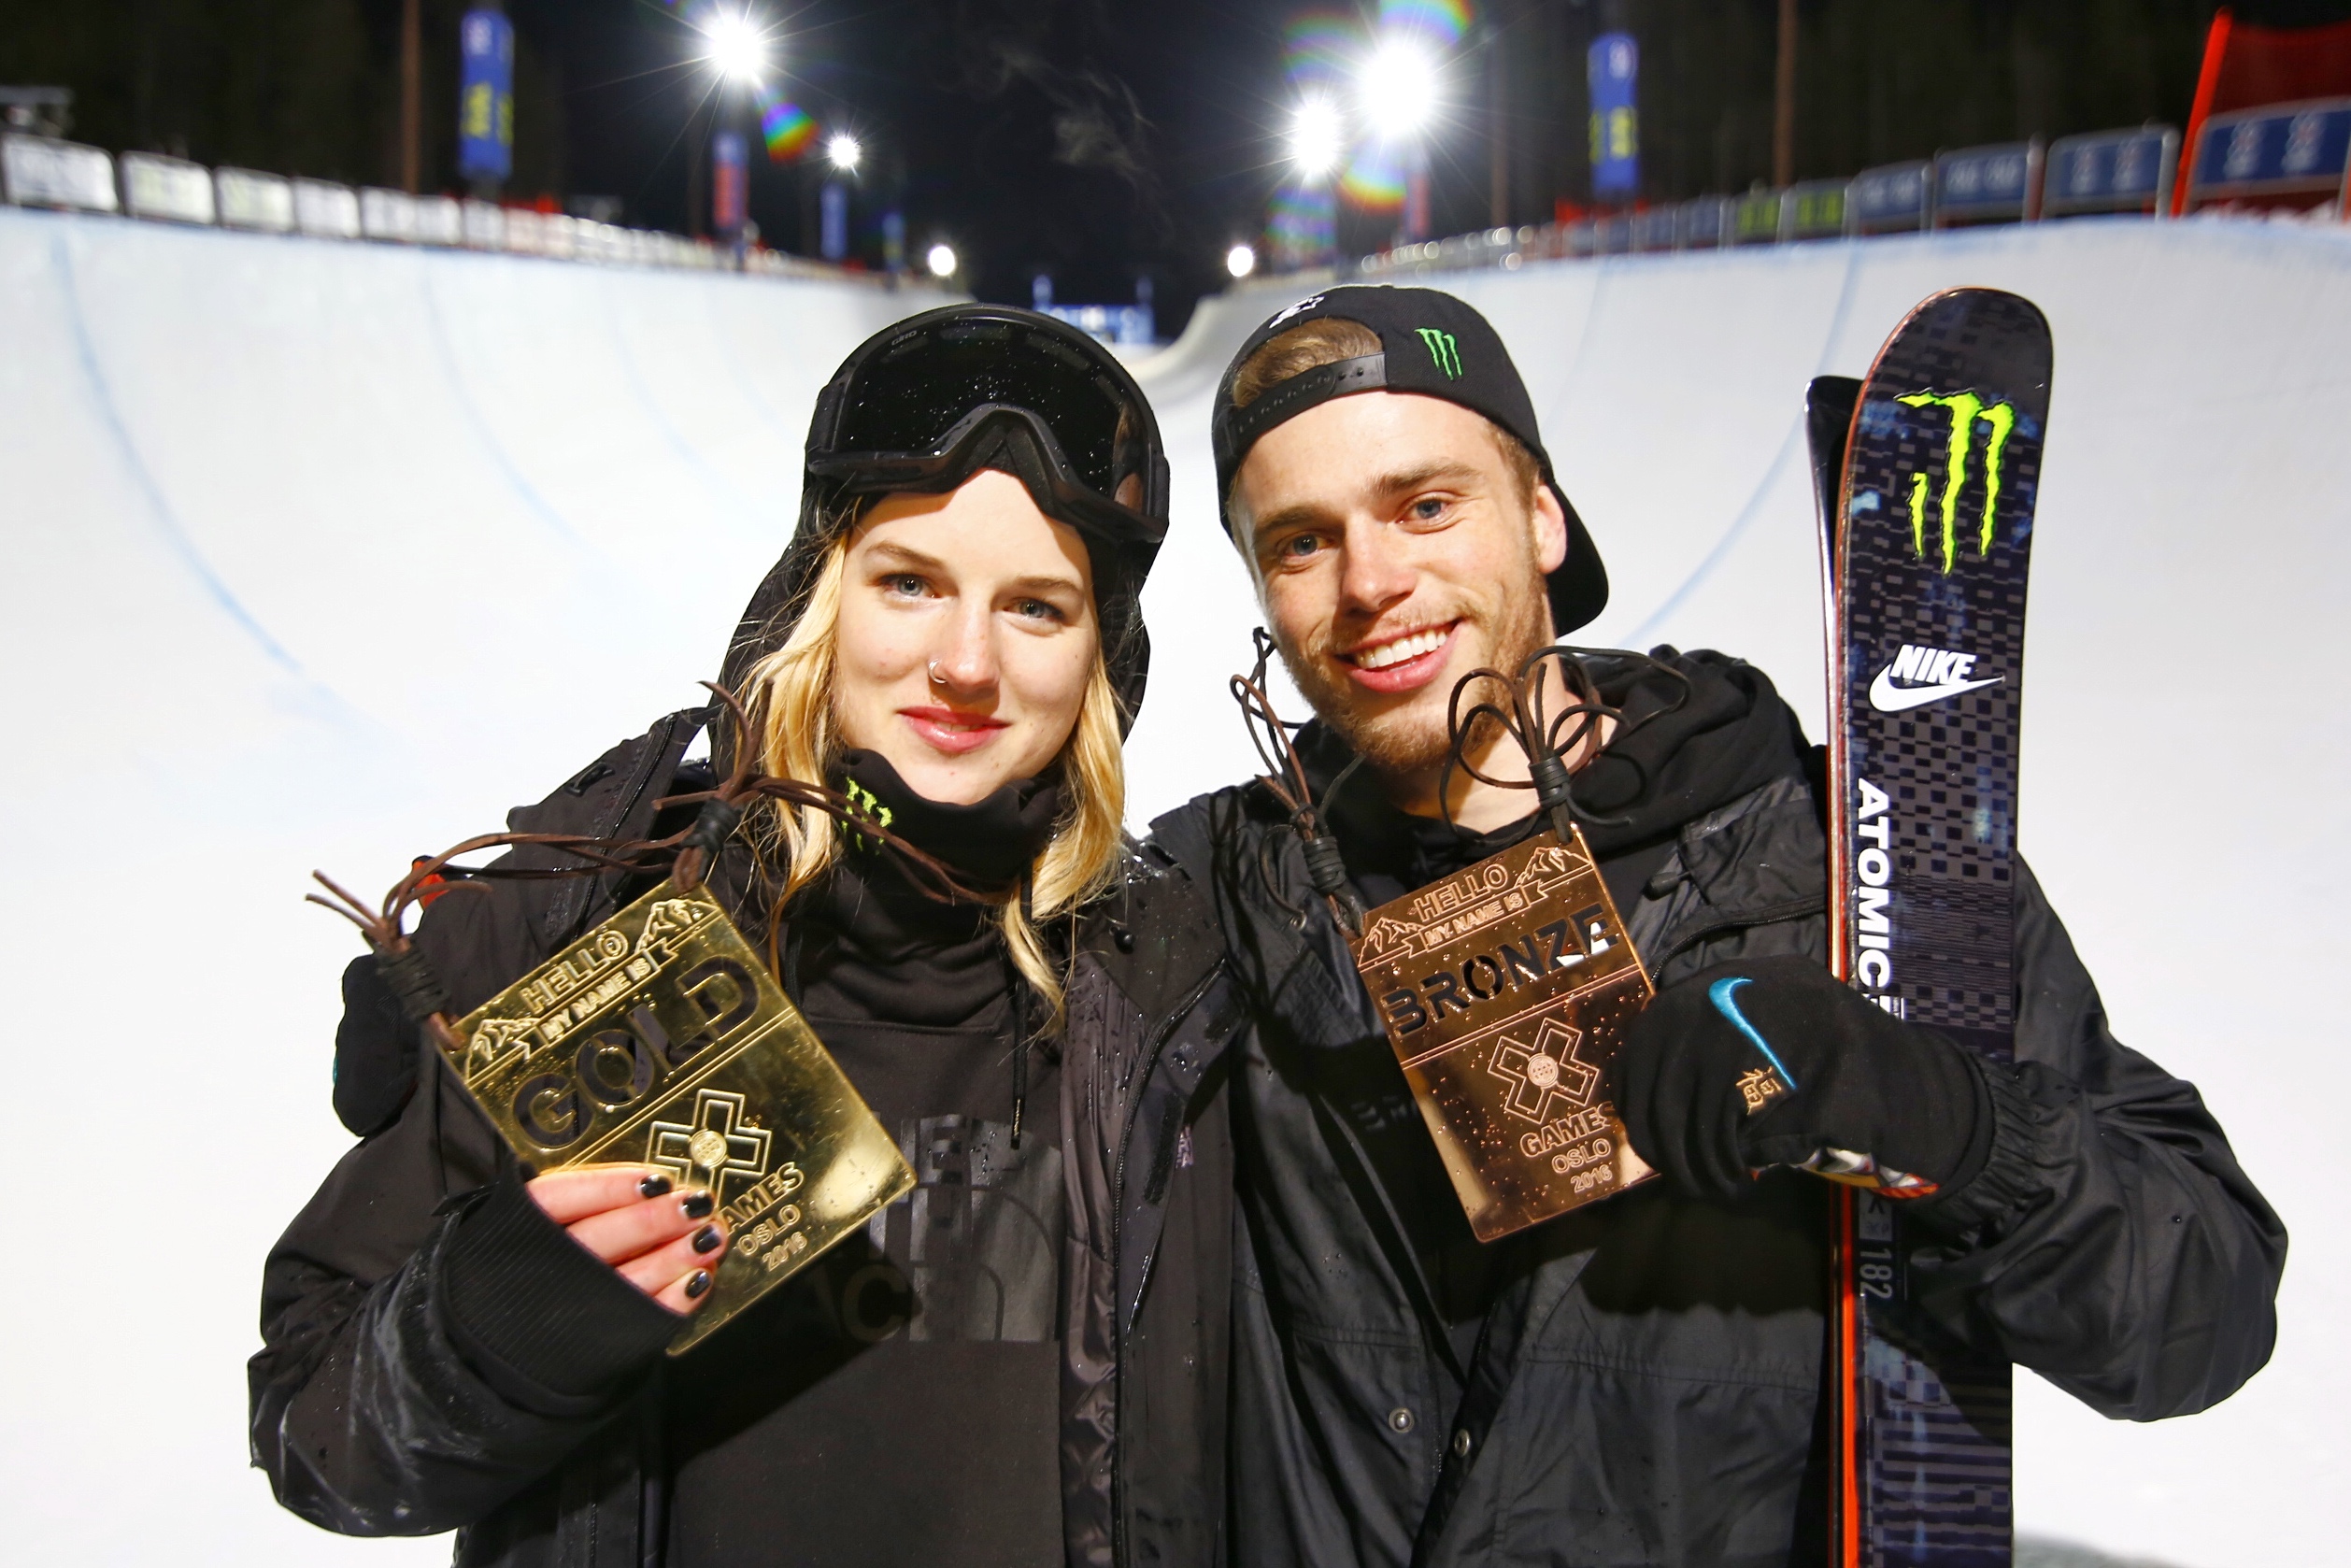 Monster Energy's Cassie Sharpe Will Compete in Women's Ski SuperPipe and Gus Kenworthy Will Compete in Men's Ski SuperPipe at X Games Aspen 2022